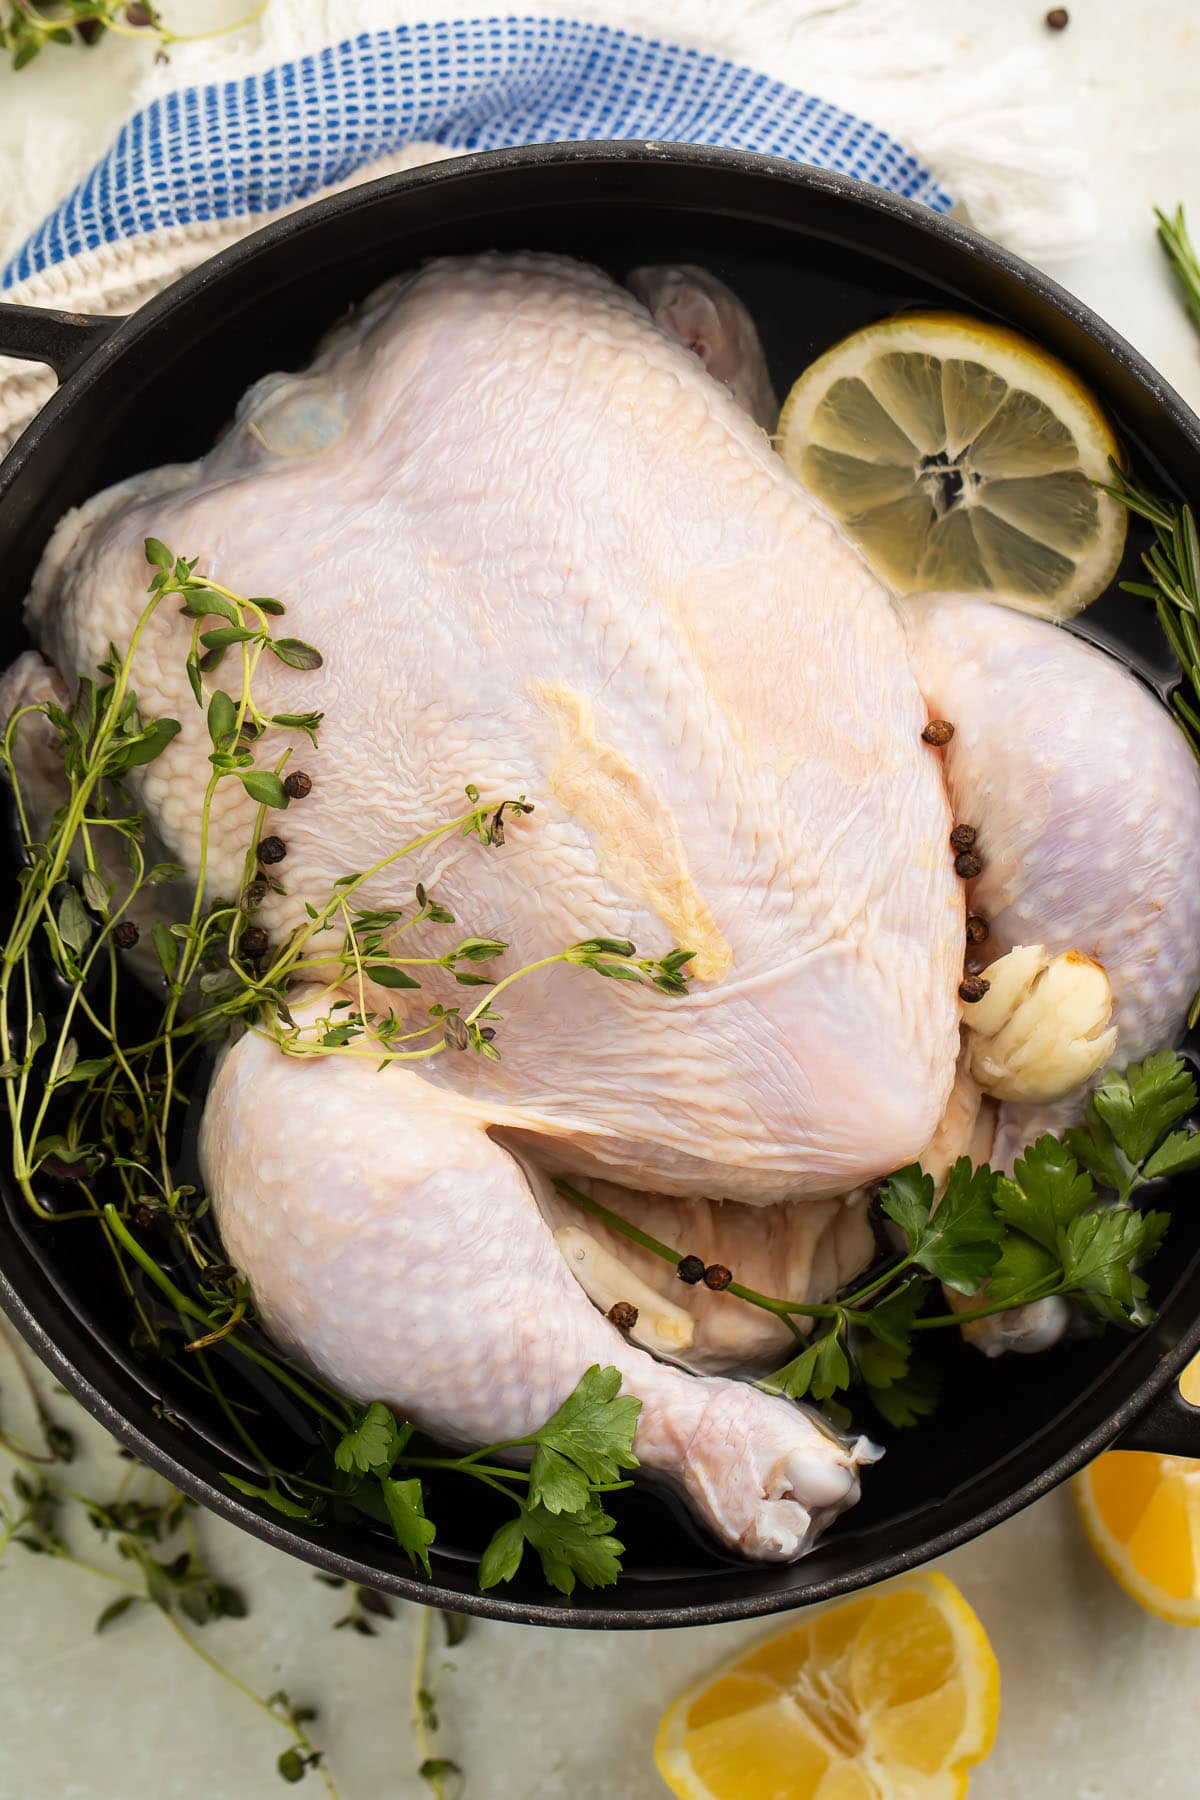 A whole, uncooked chicken in a large pot filled with a quick chicken brine of water, lemon, and herbs.